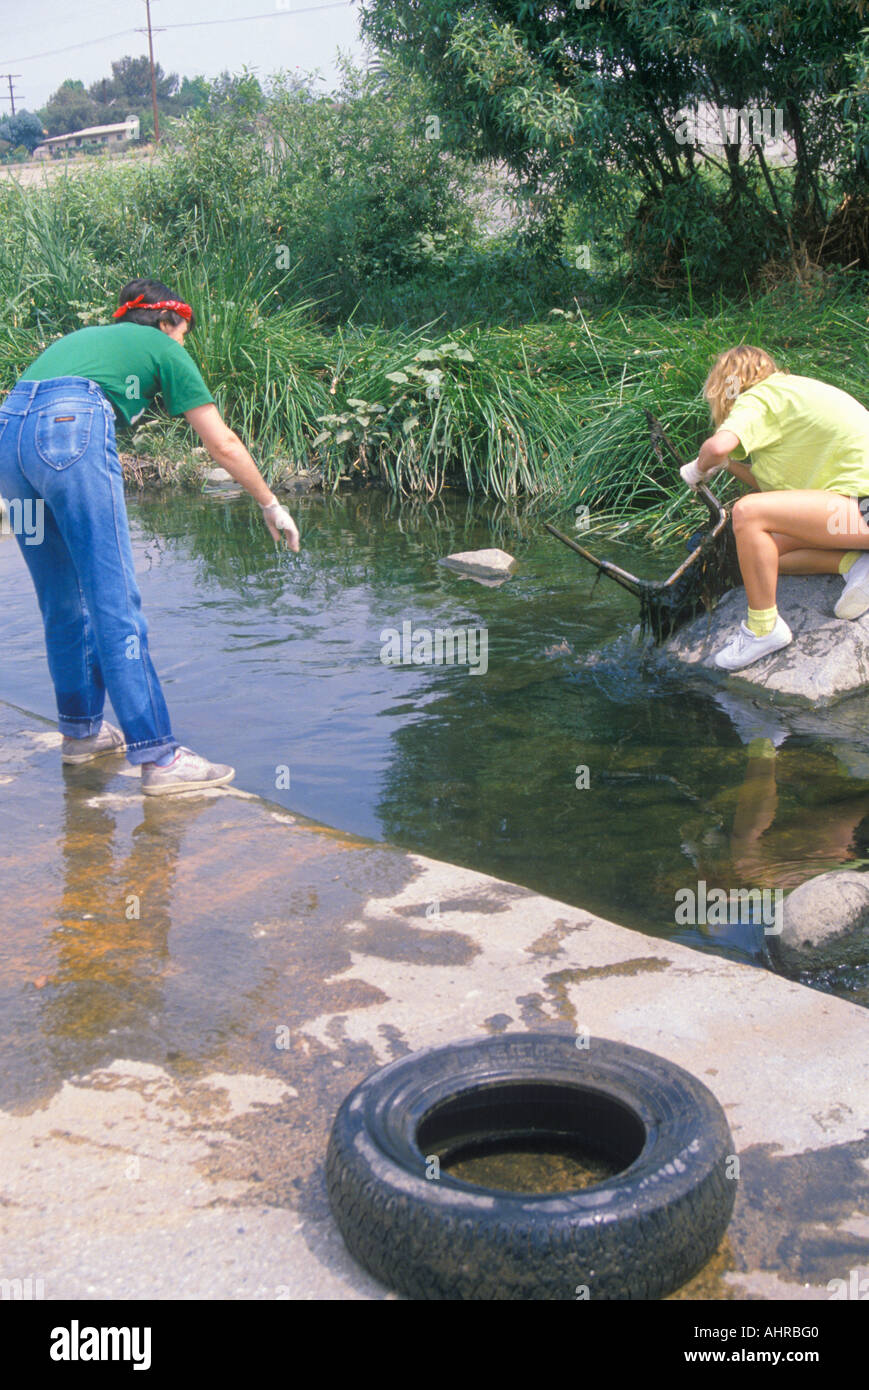 Two women working together to retrieve a chair from a small body of water Stock Photo